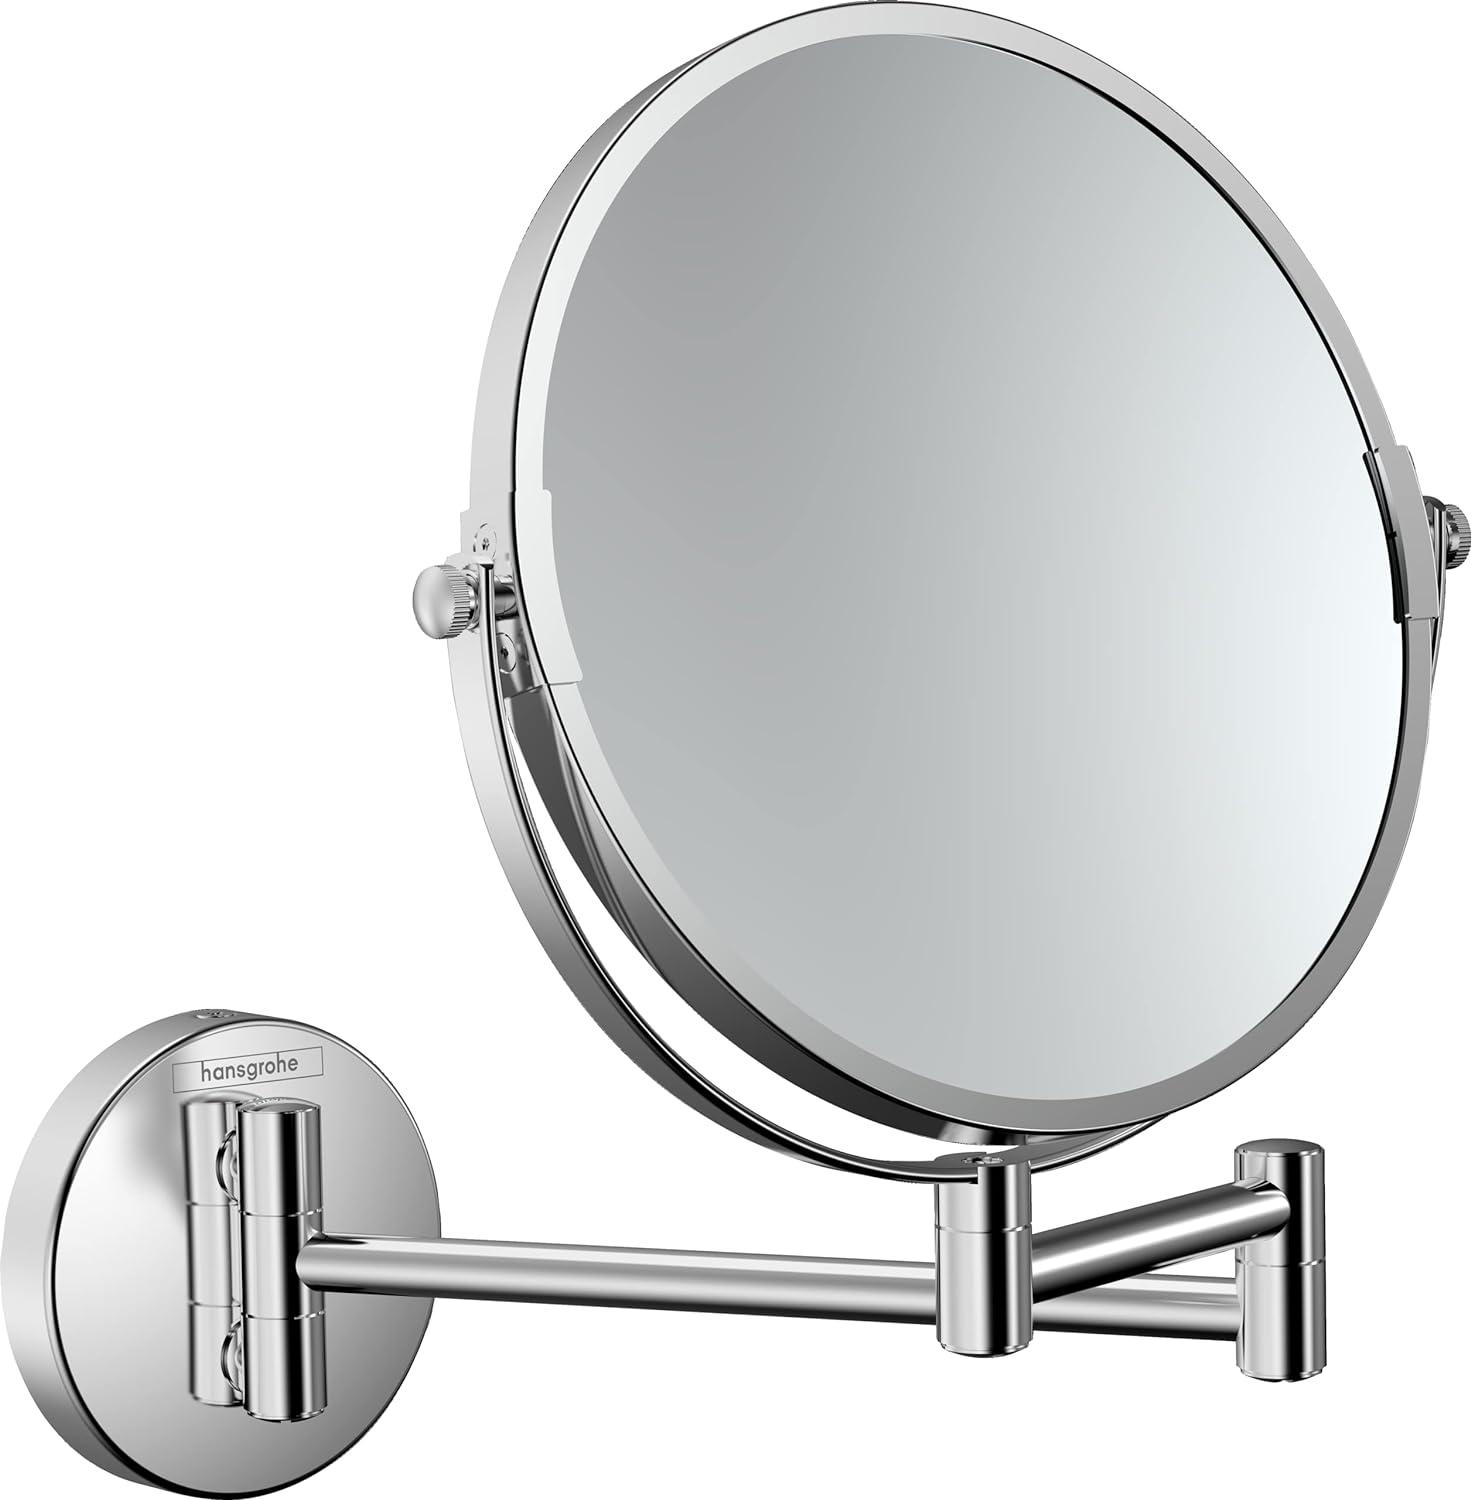 Elegant Chrome Wall-Mounted Shaving Mirror with 3x Magnification